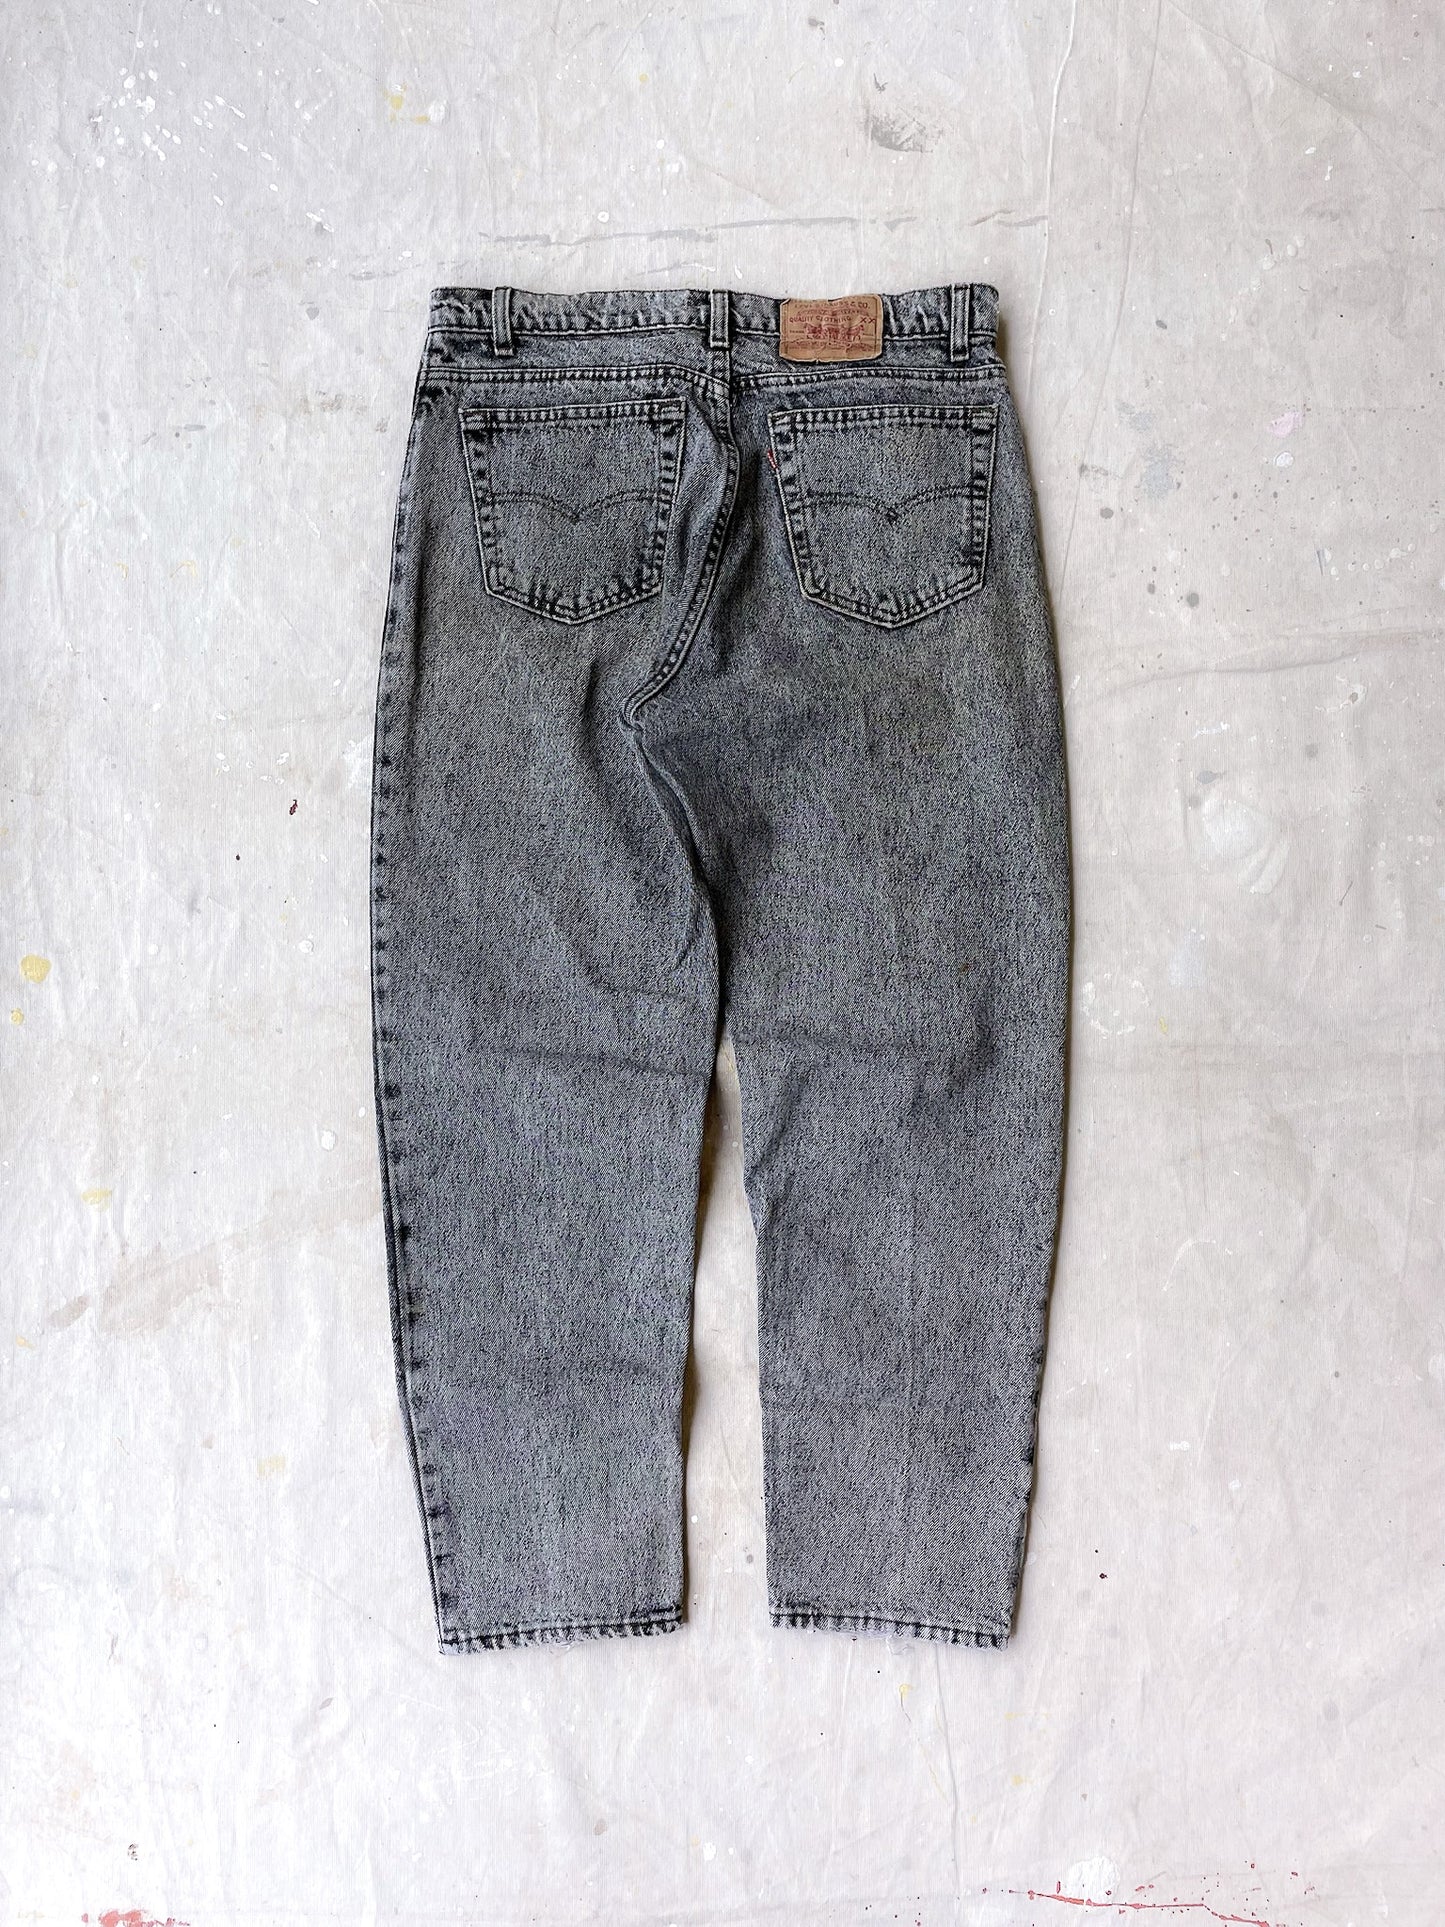 80's Levi’s Black Washed Jeans—[34x30]